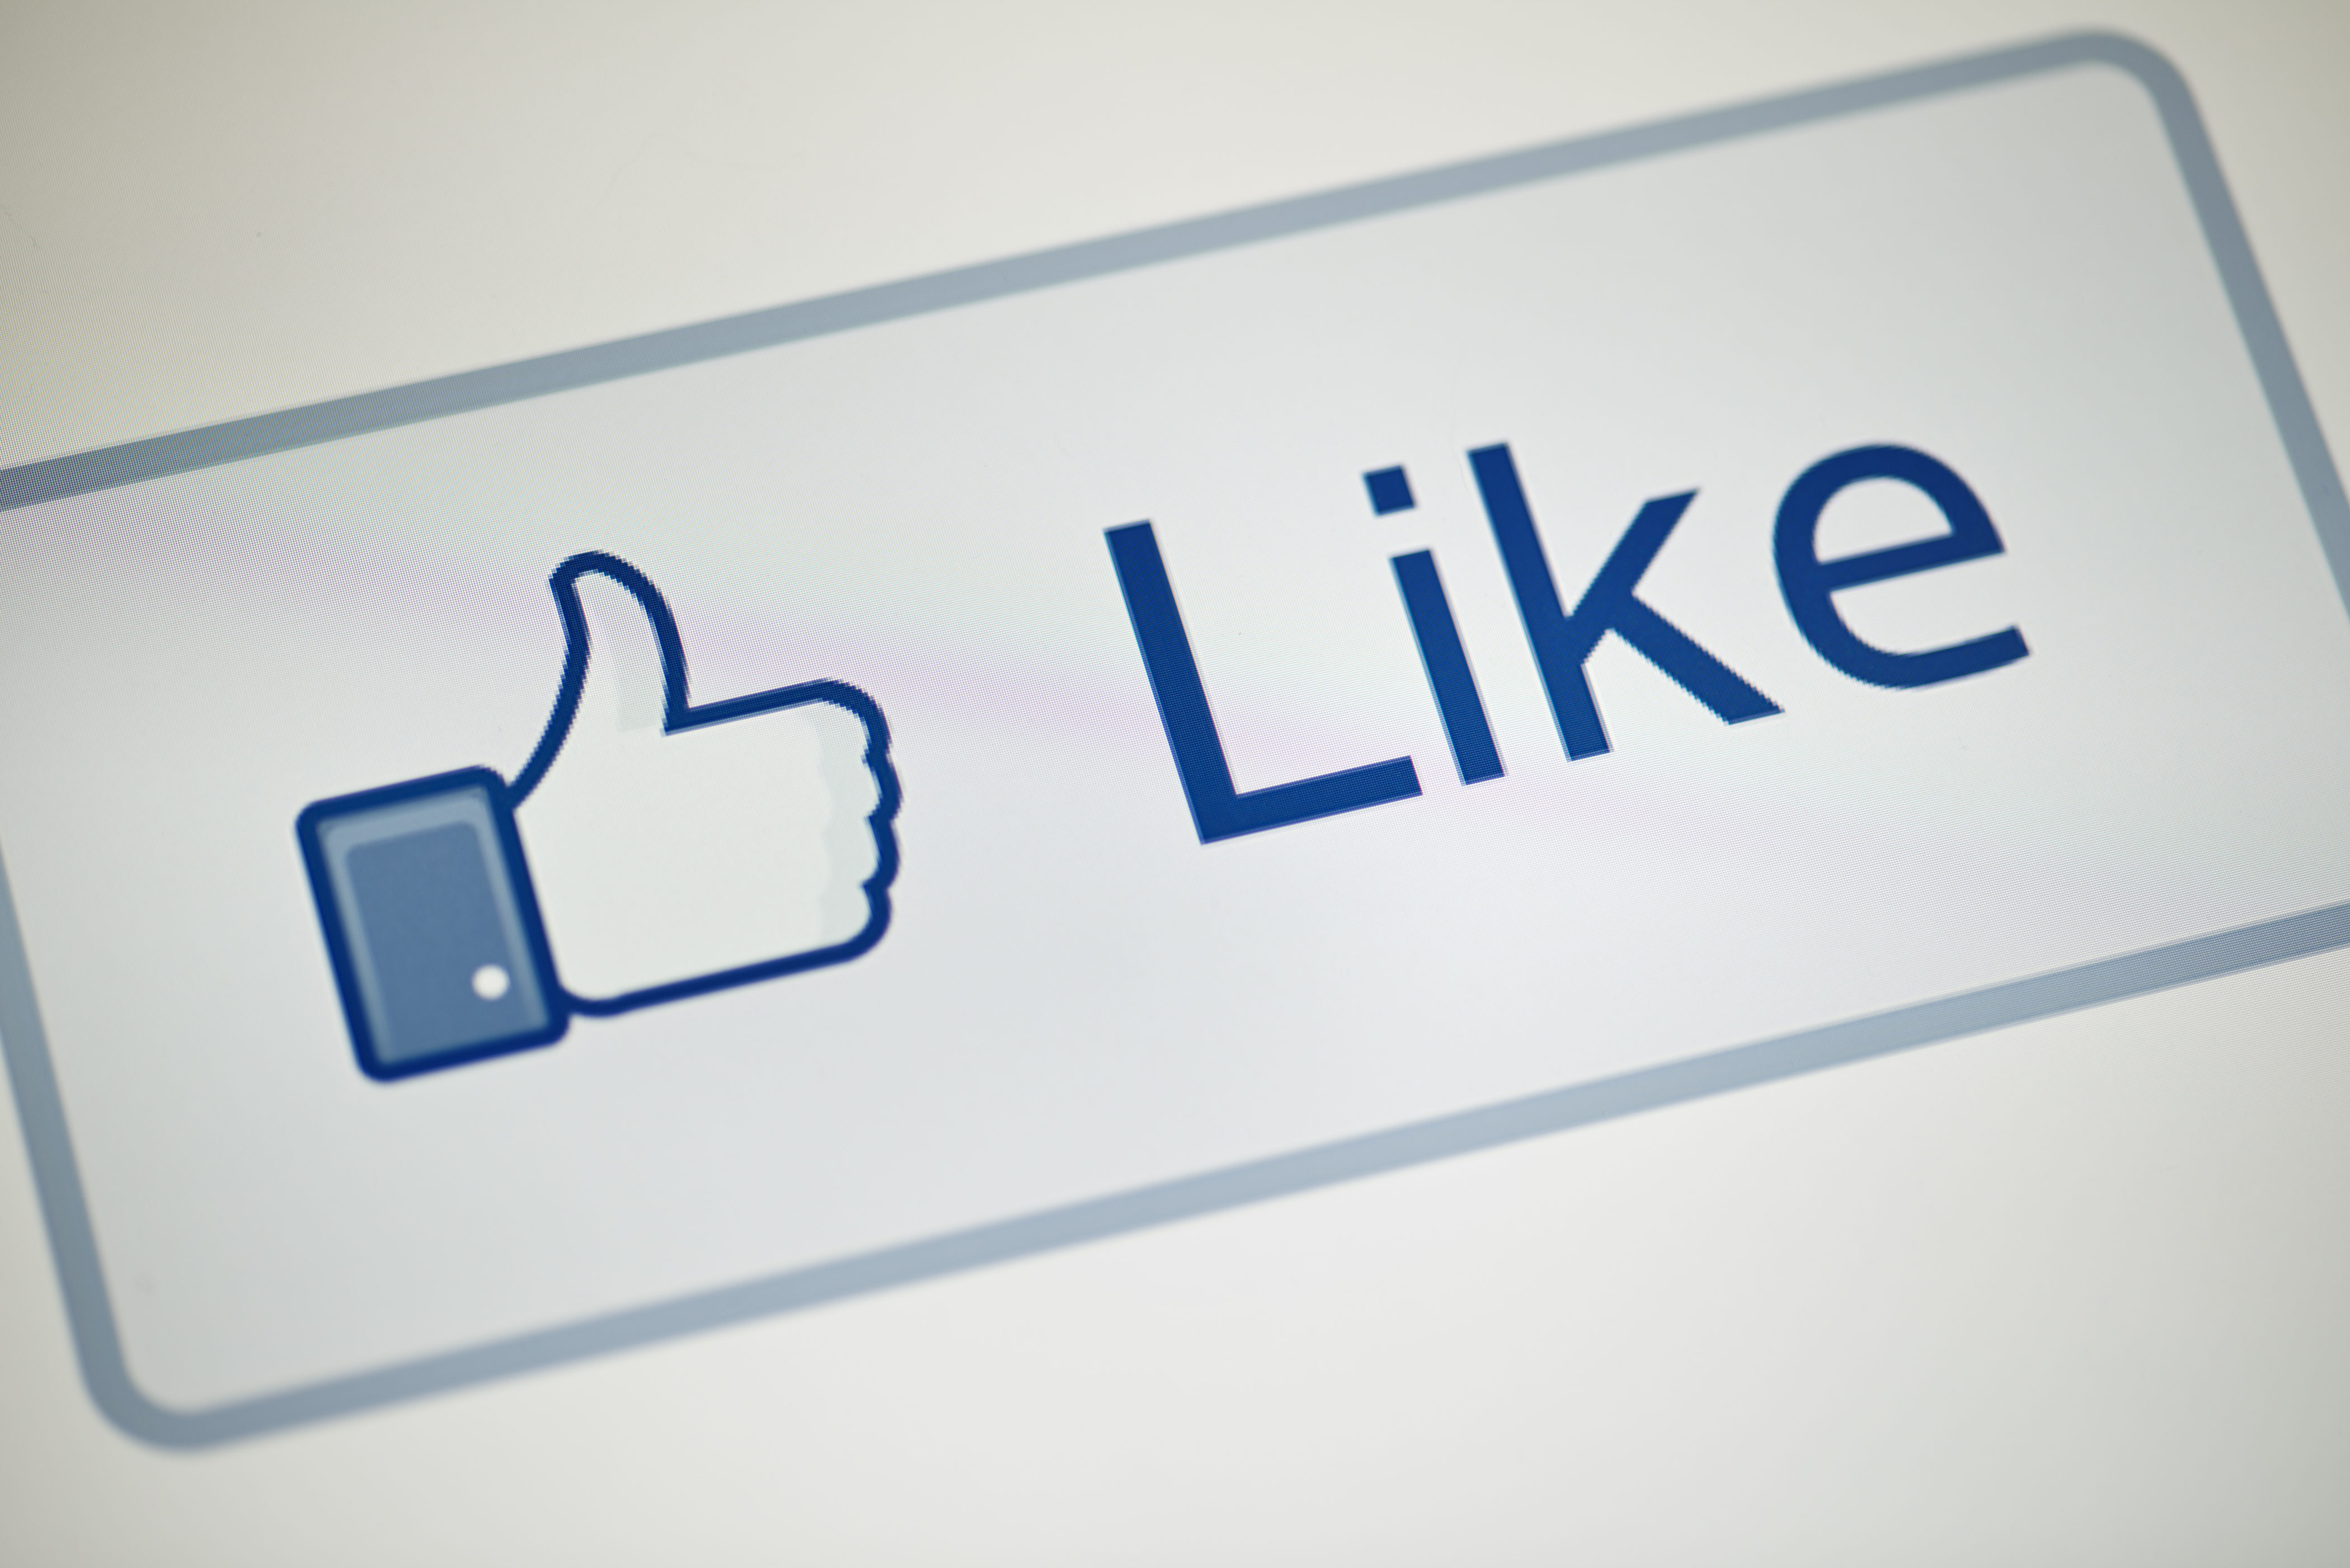 A view of Facebook's "Like" button May 1